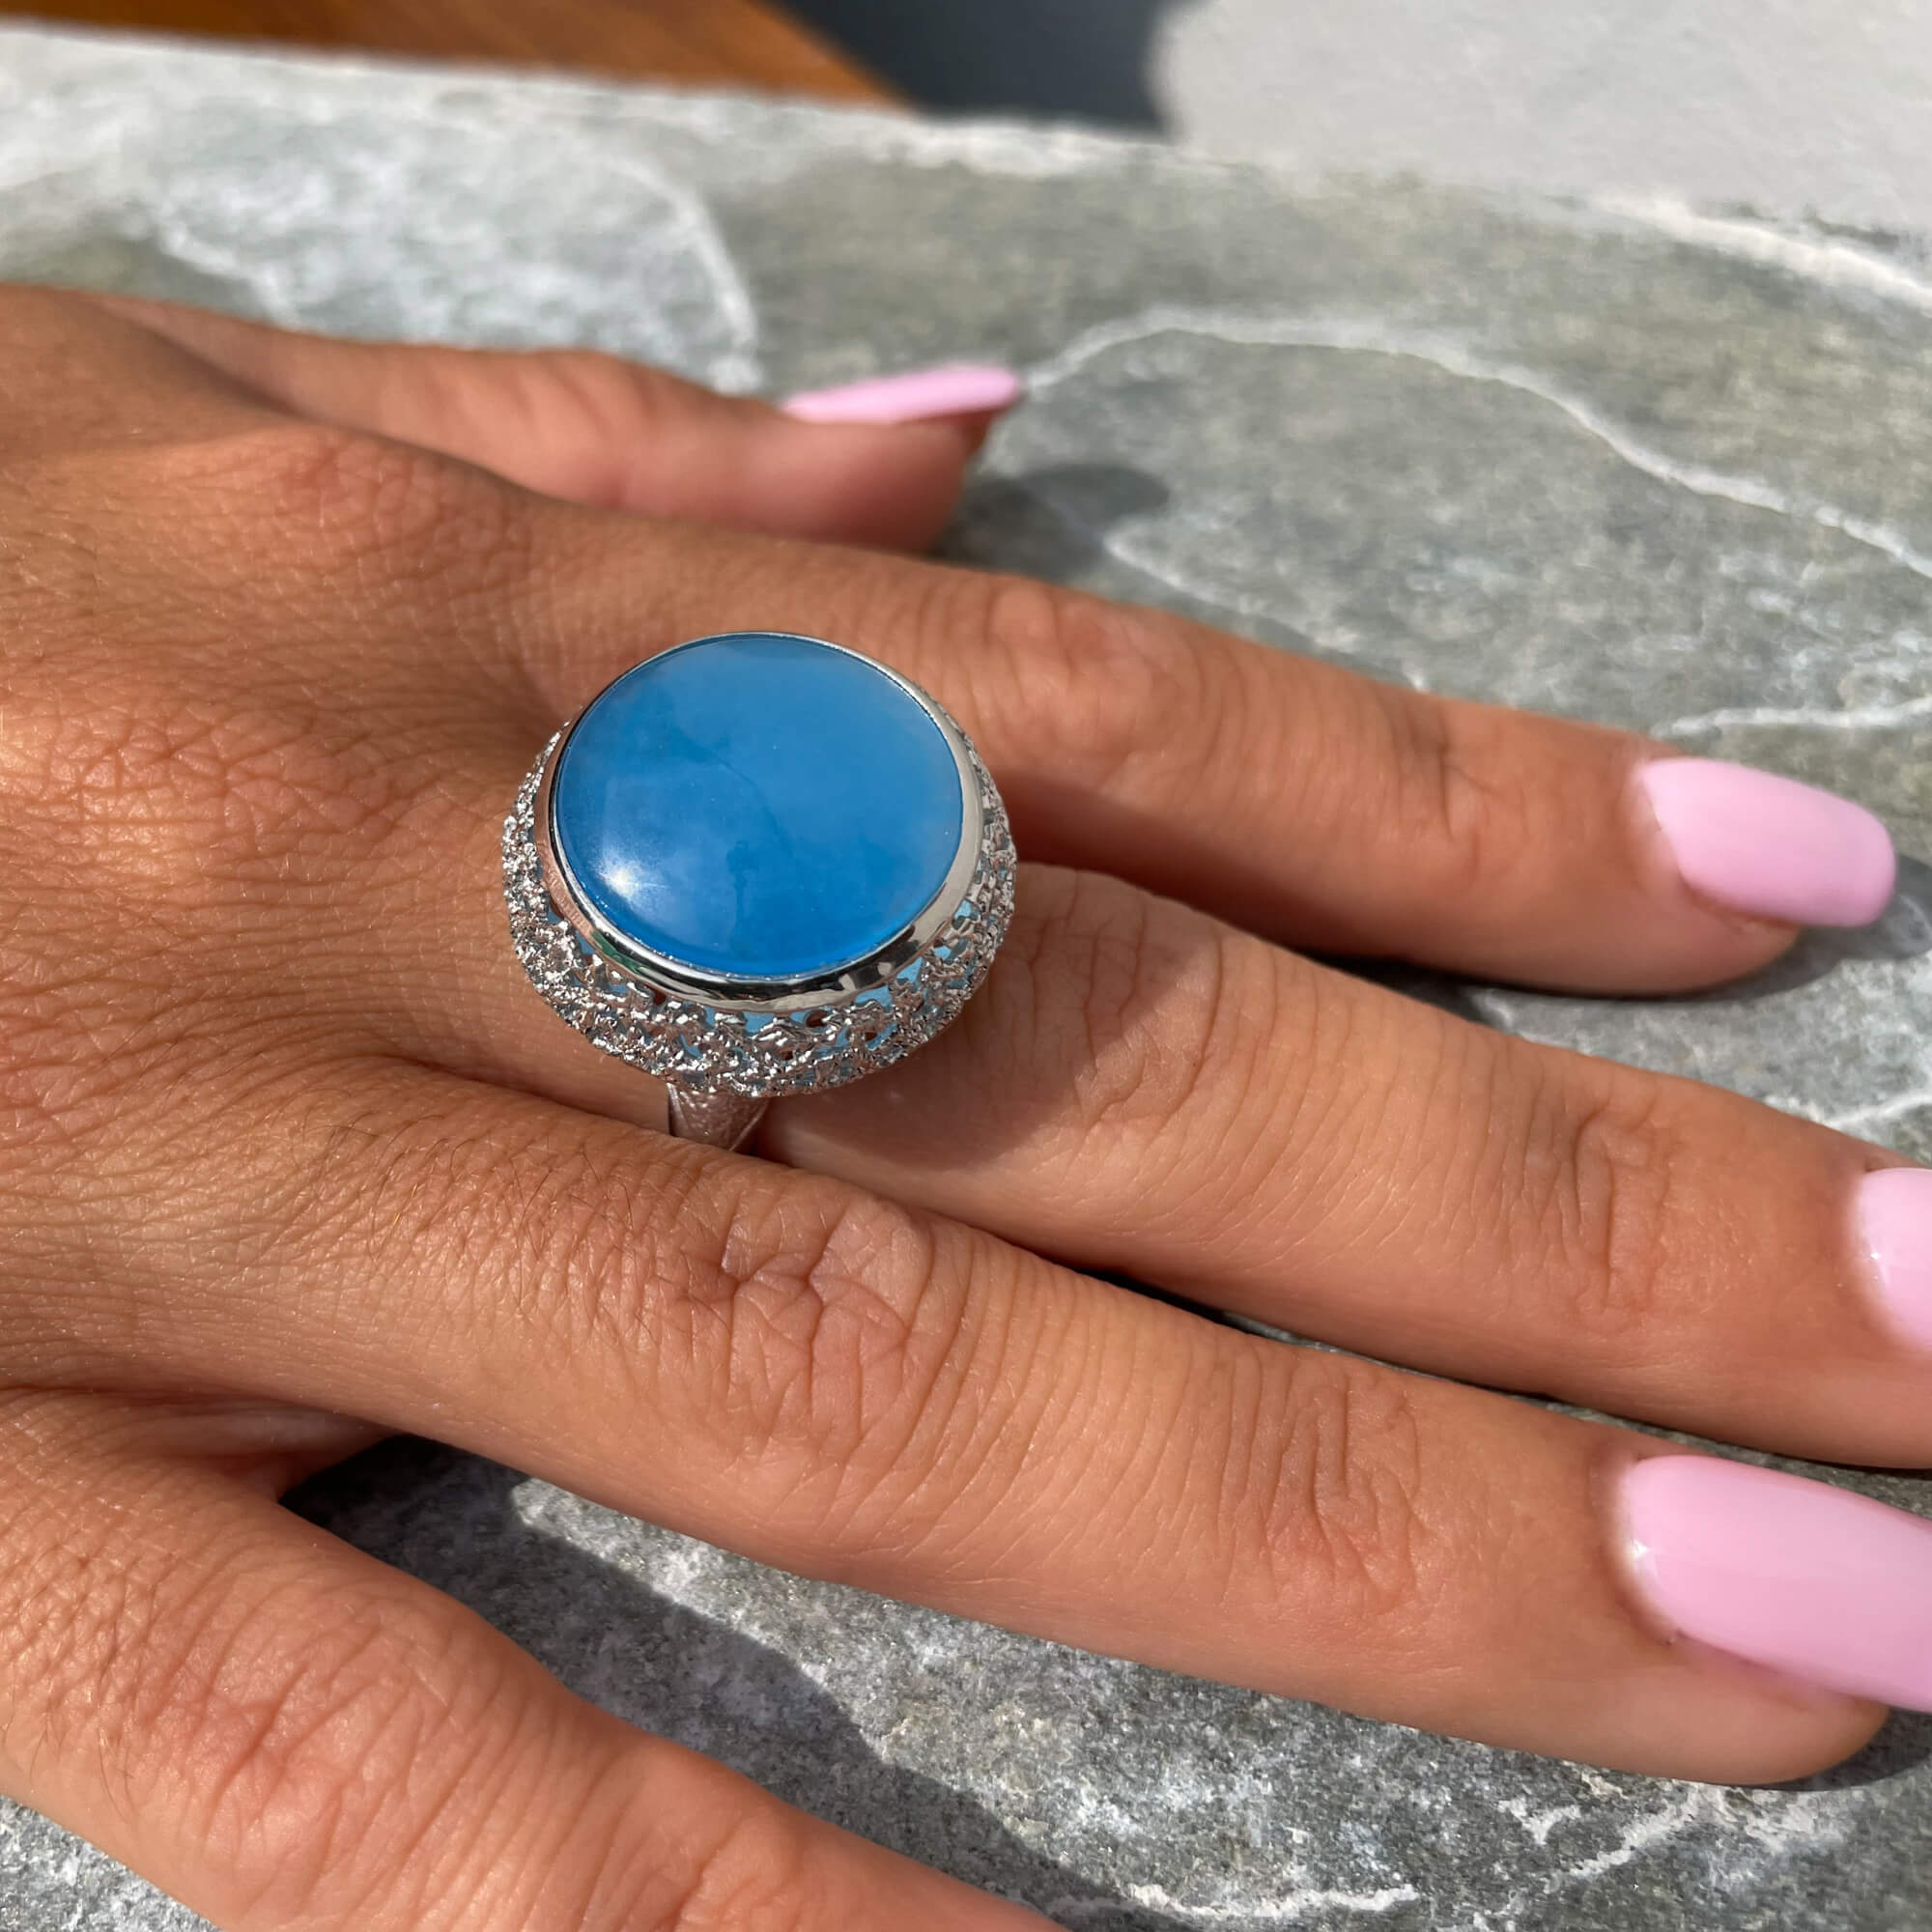 Edited silver ring with a blue quartz stone